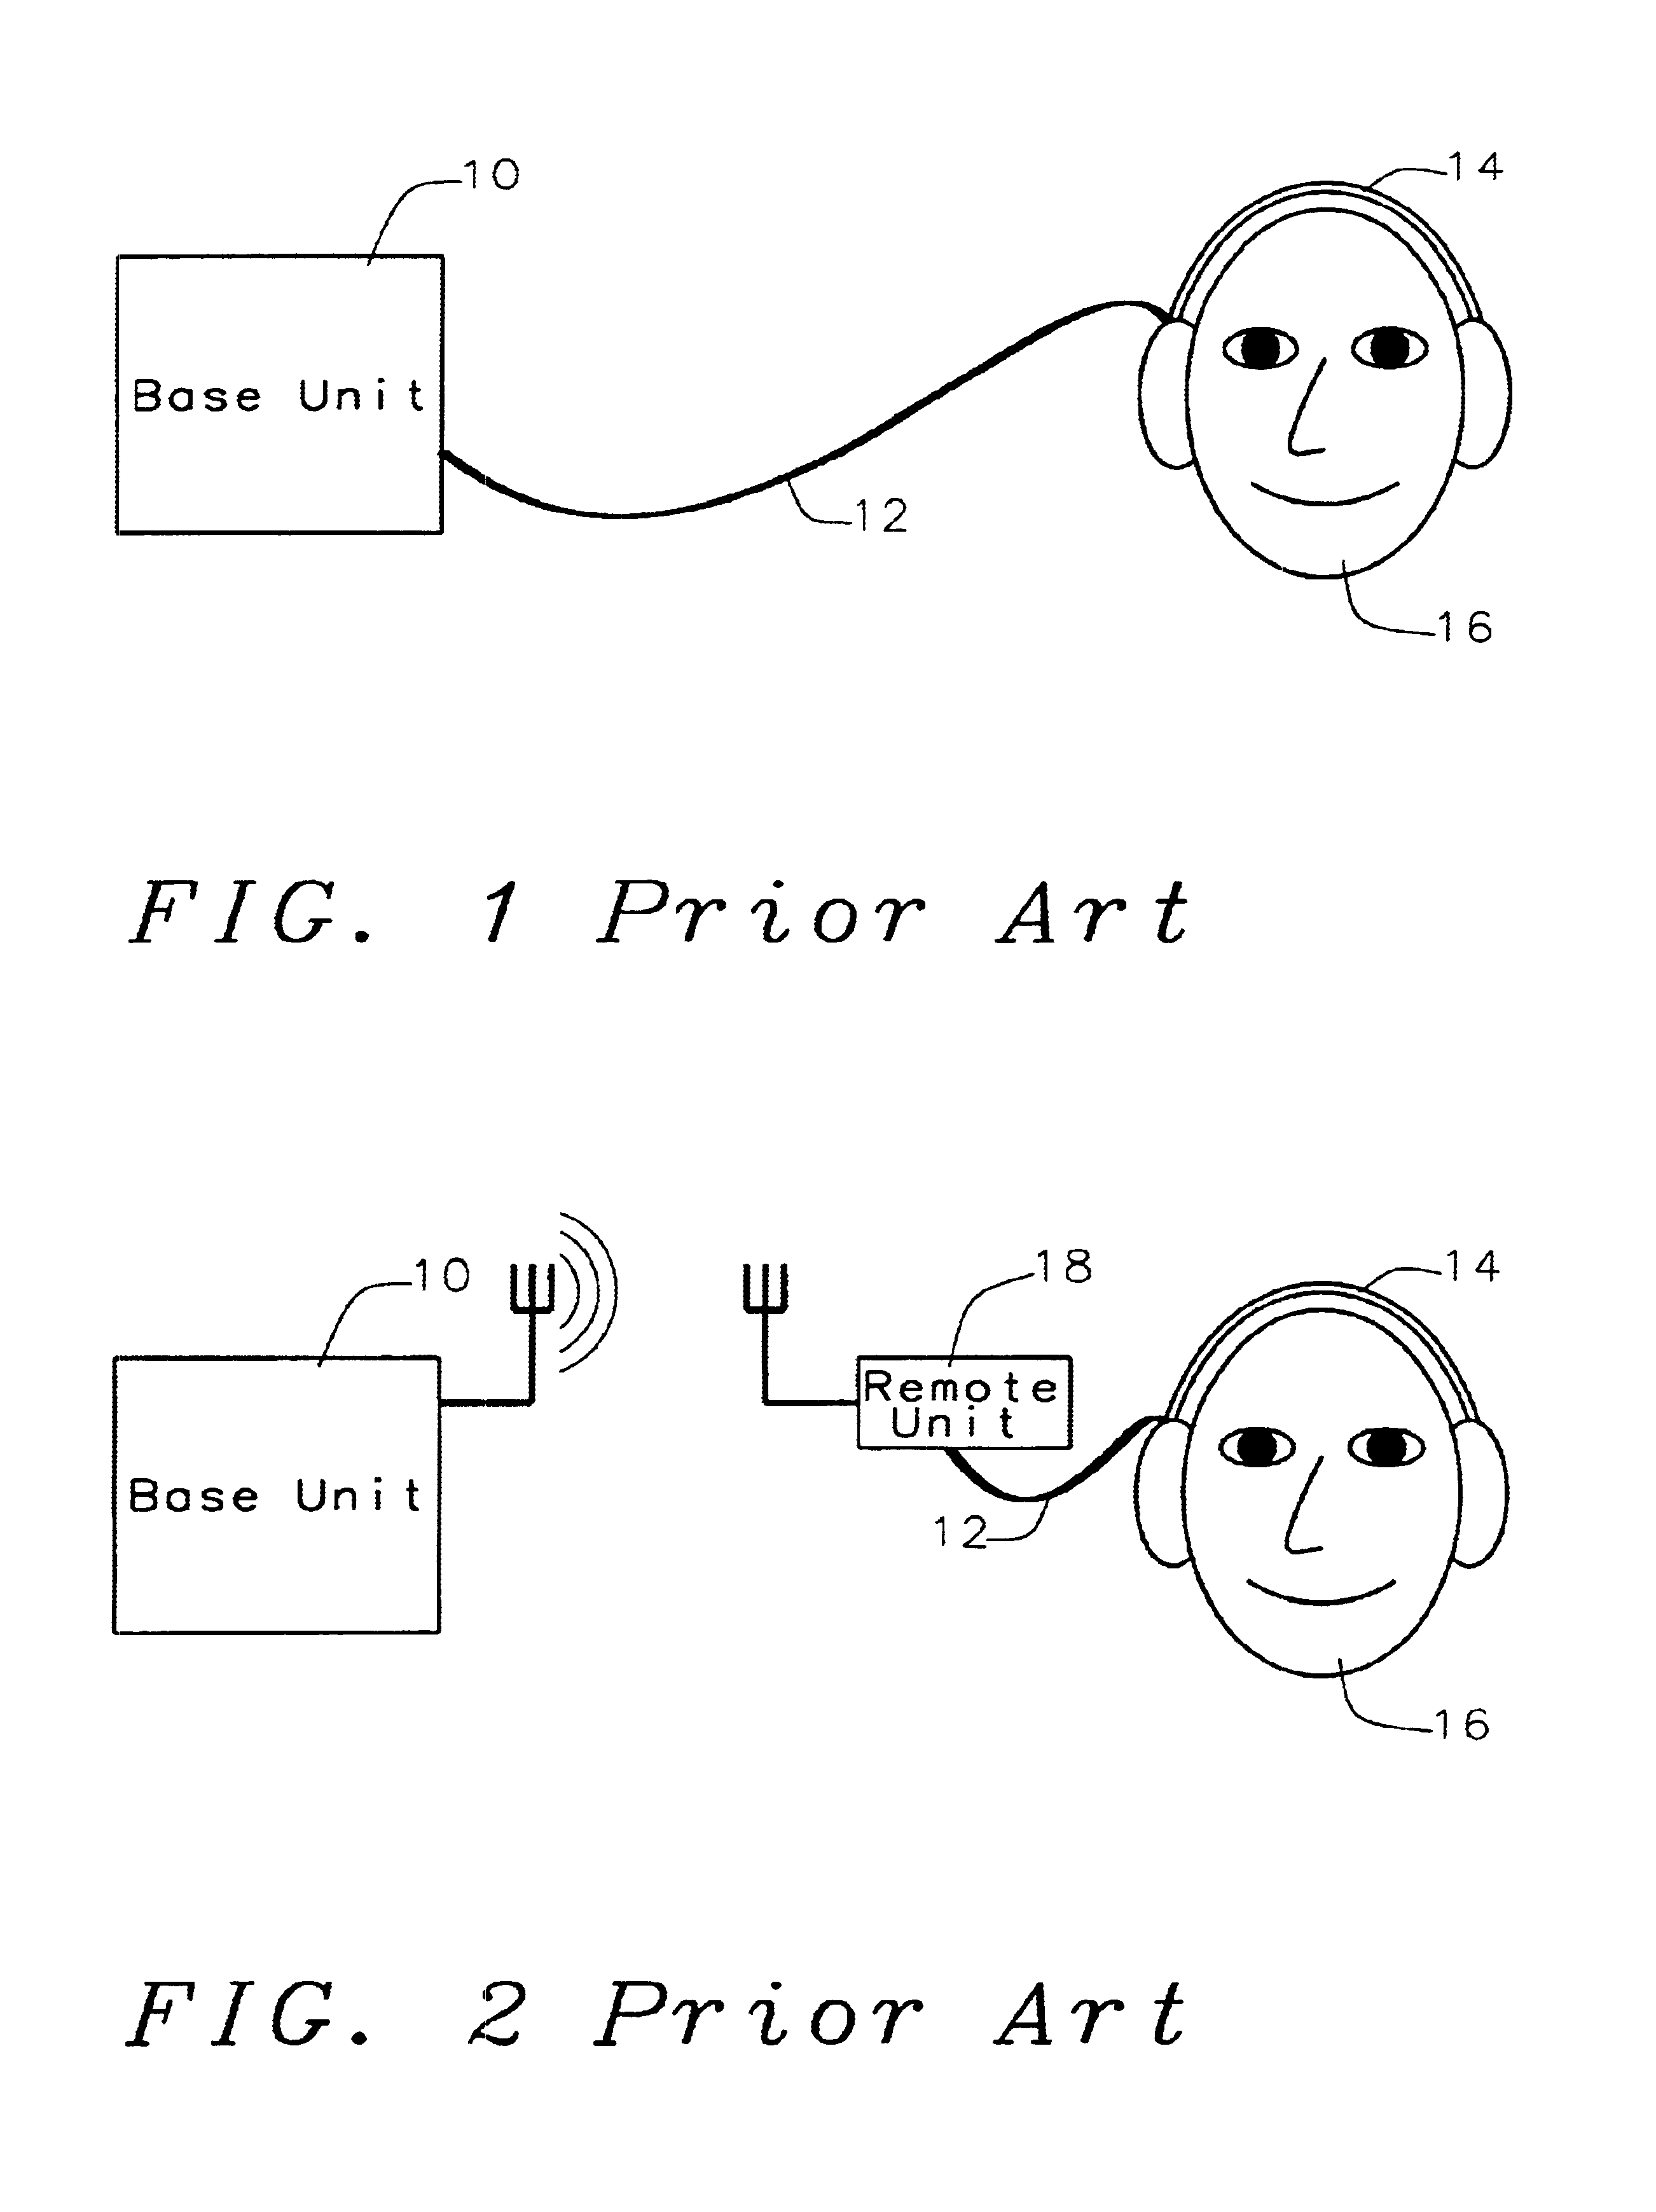 Biaural (2channel listening device that is equalized in-stu to compensate for differences between left and right earphone transducers and the ears themselves